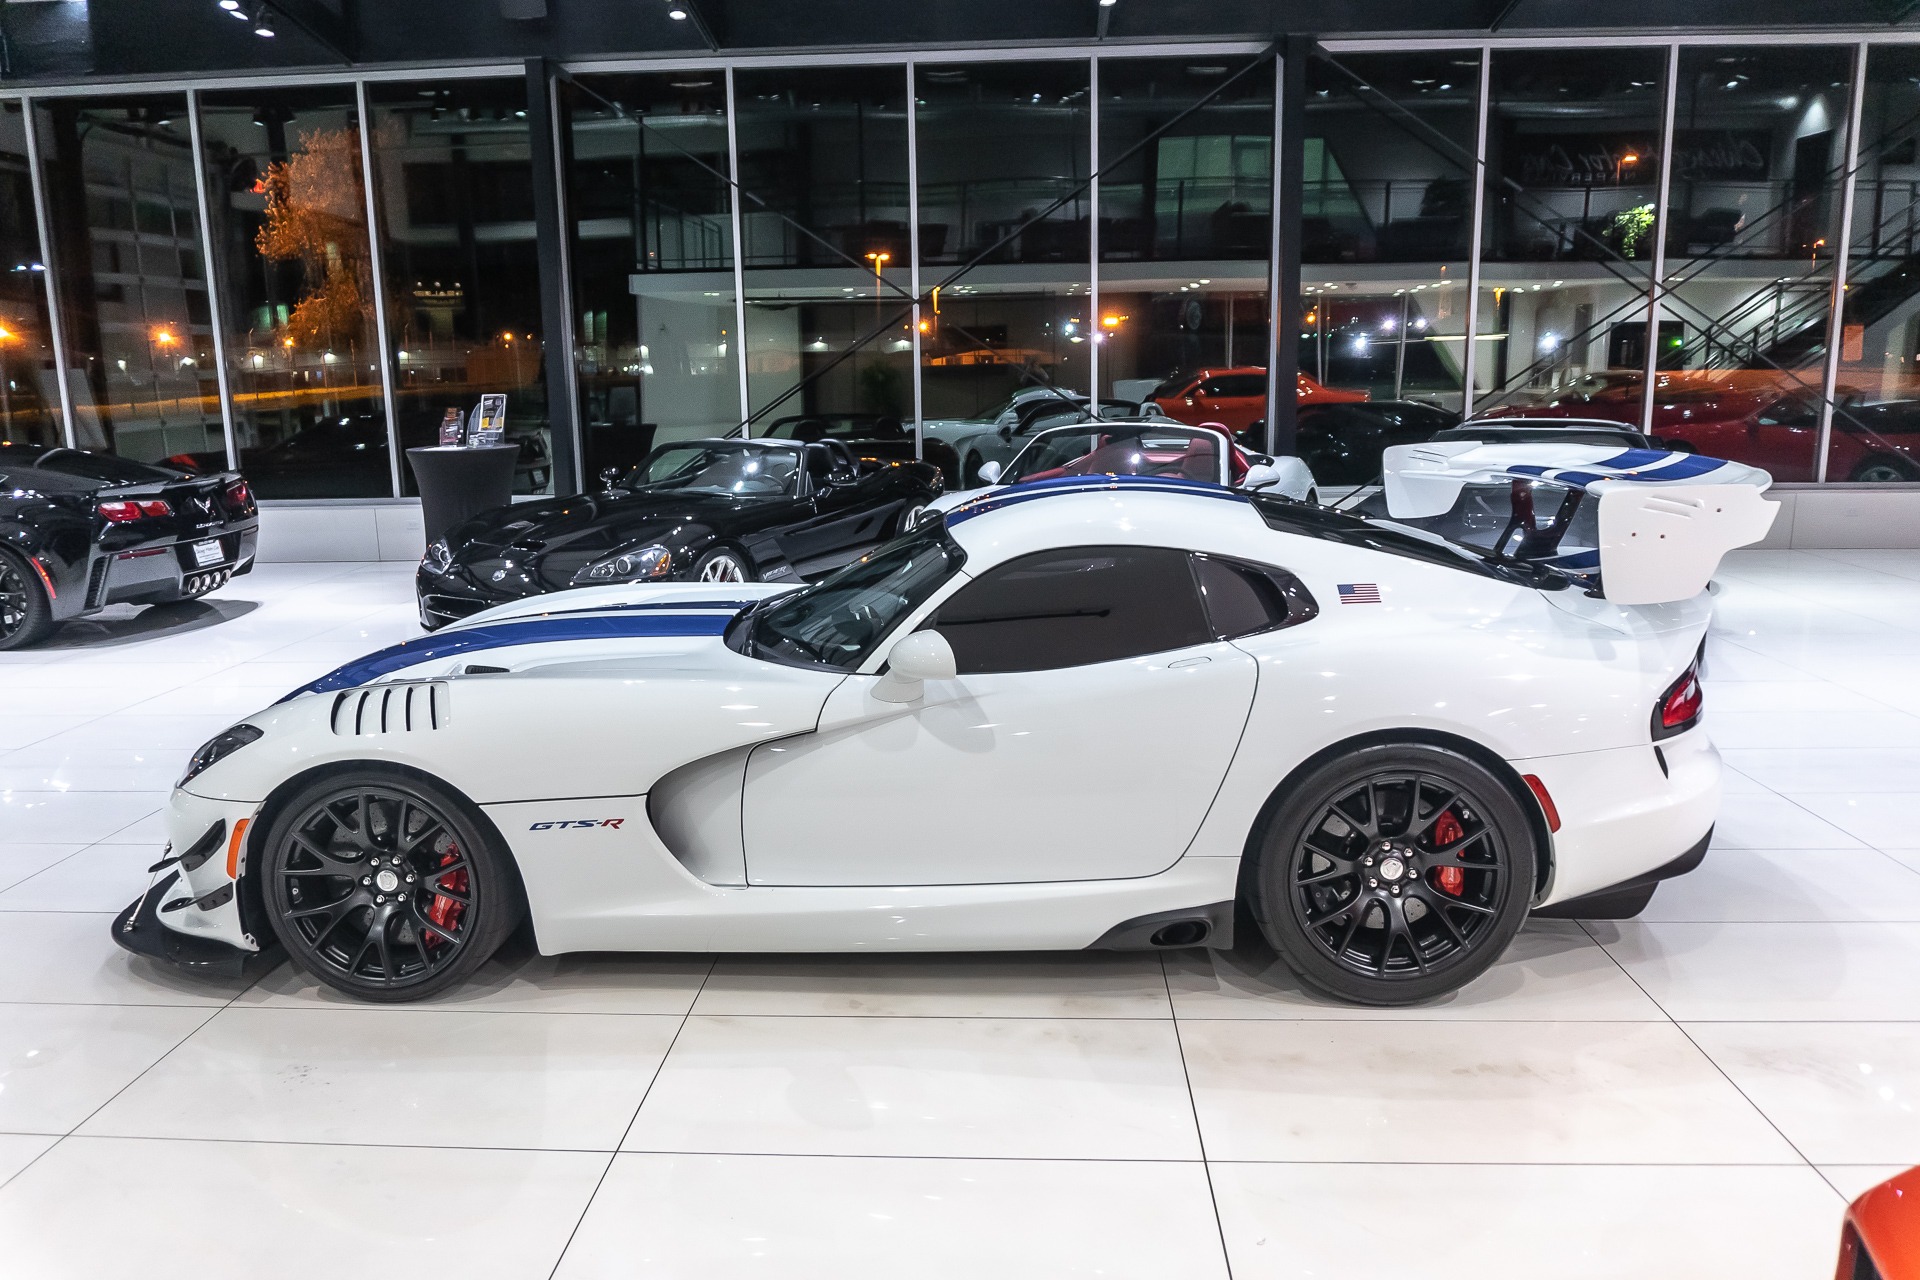 Used-2017-Dodge-Viper-ACR-GTS-R-Commemorative-Edition-1of100-Made